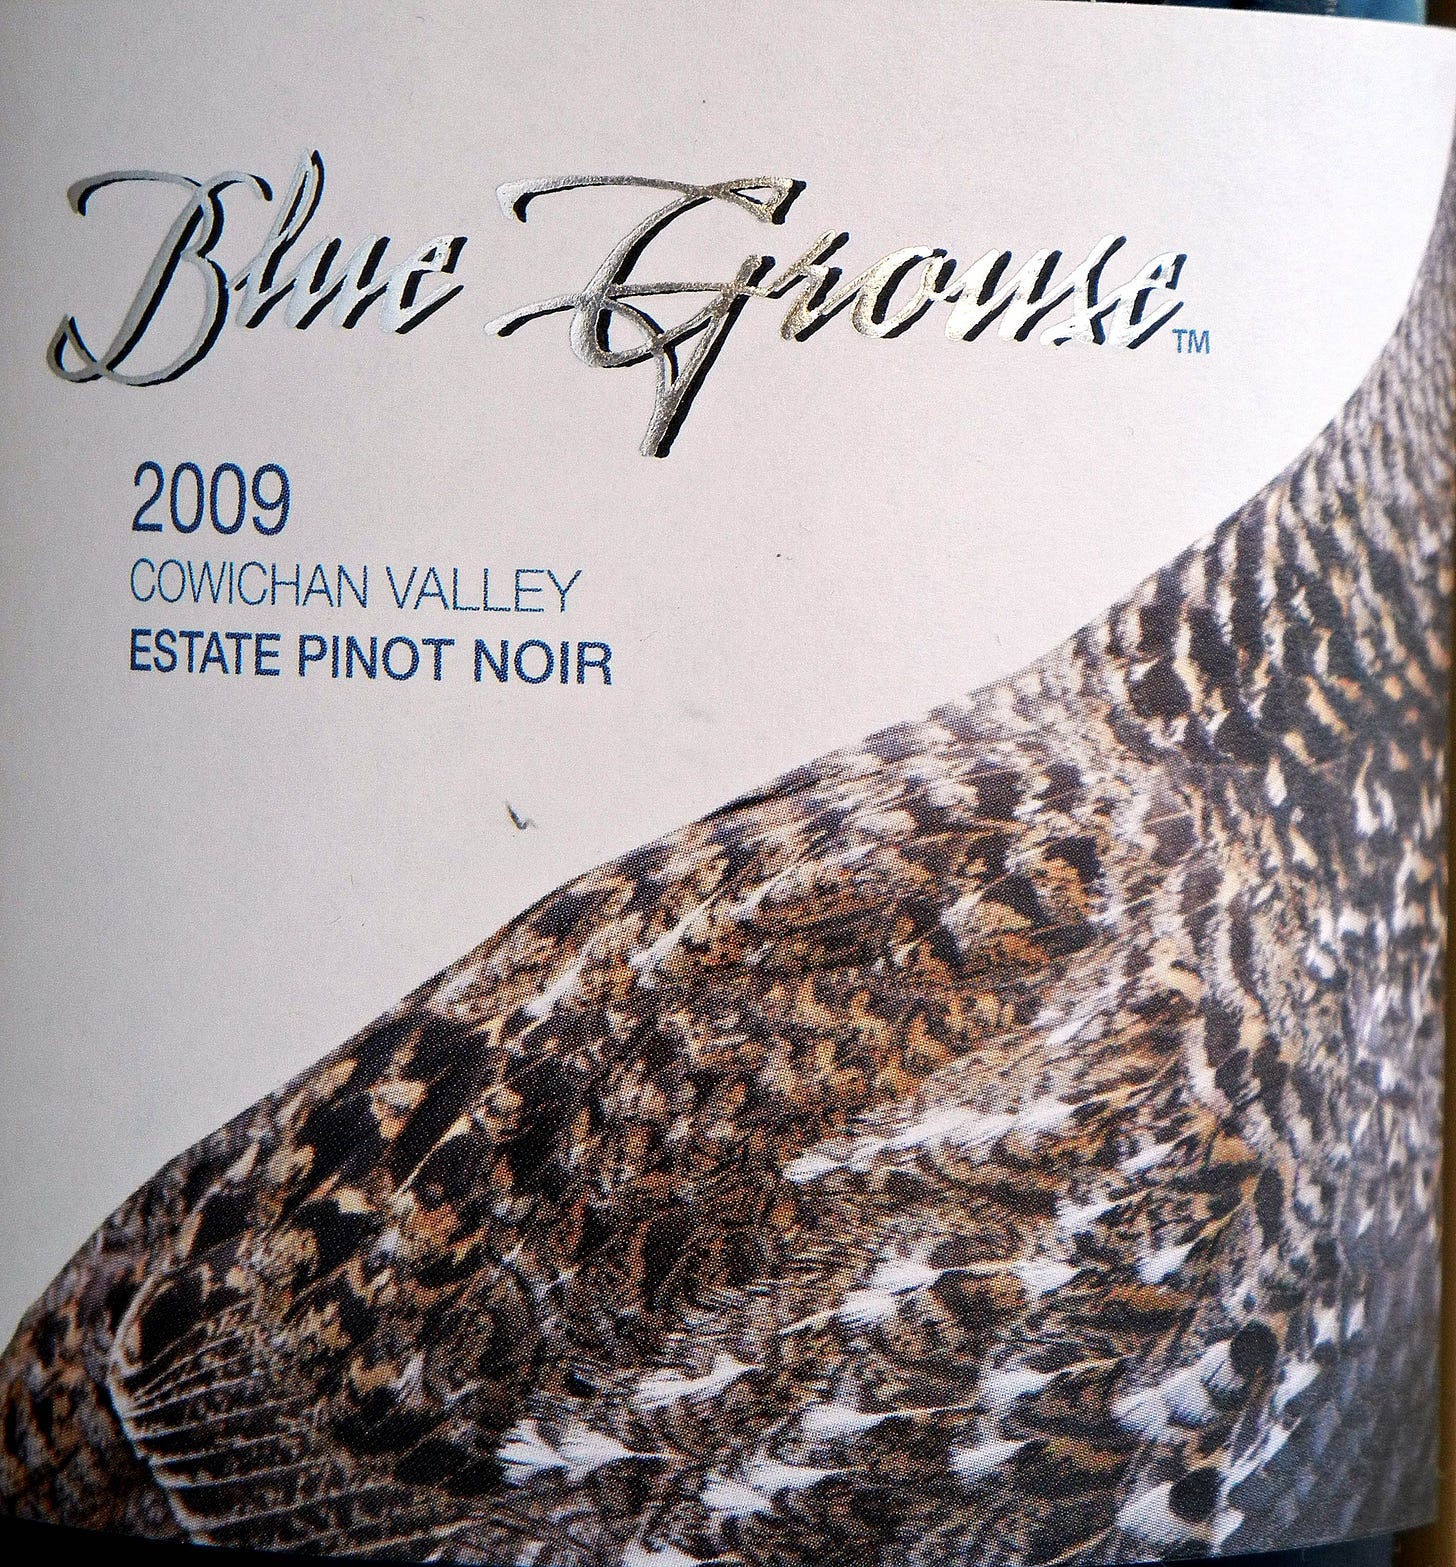 Blue Grouse Pinot Noir 2009 Label - BC Pinot Noir Tasting Review 26